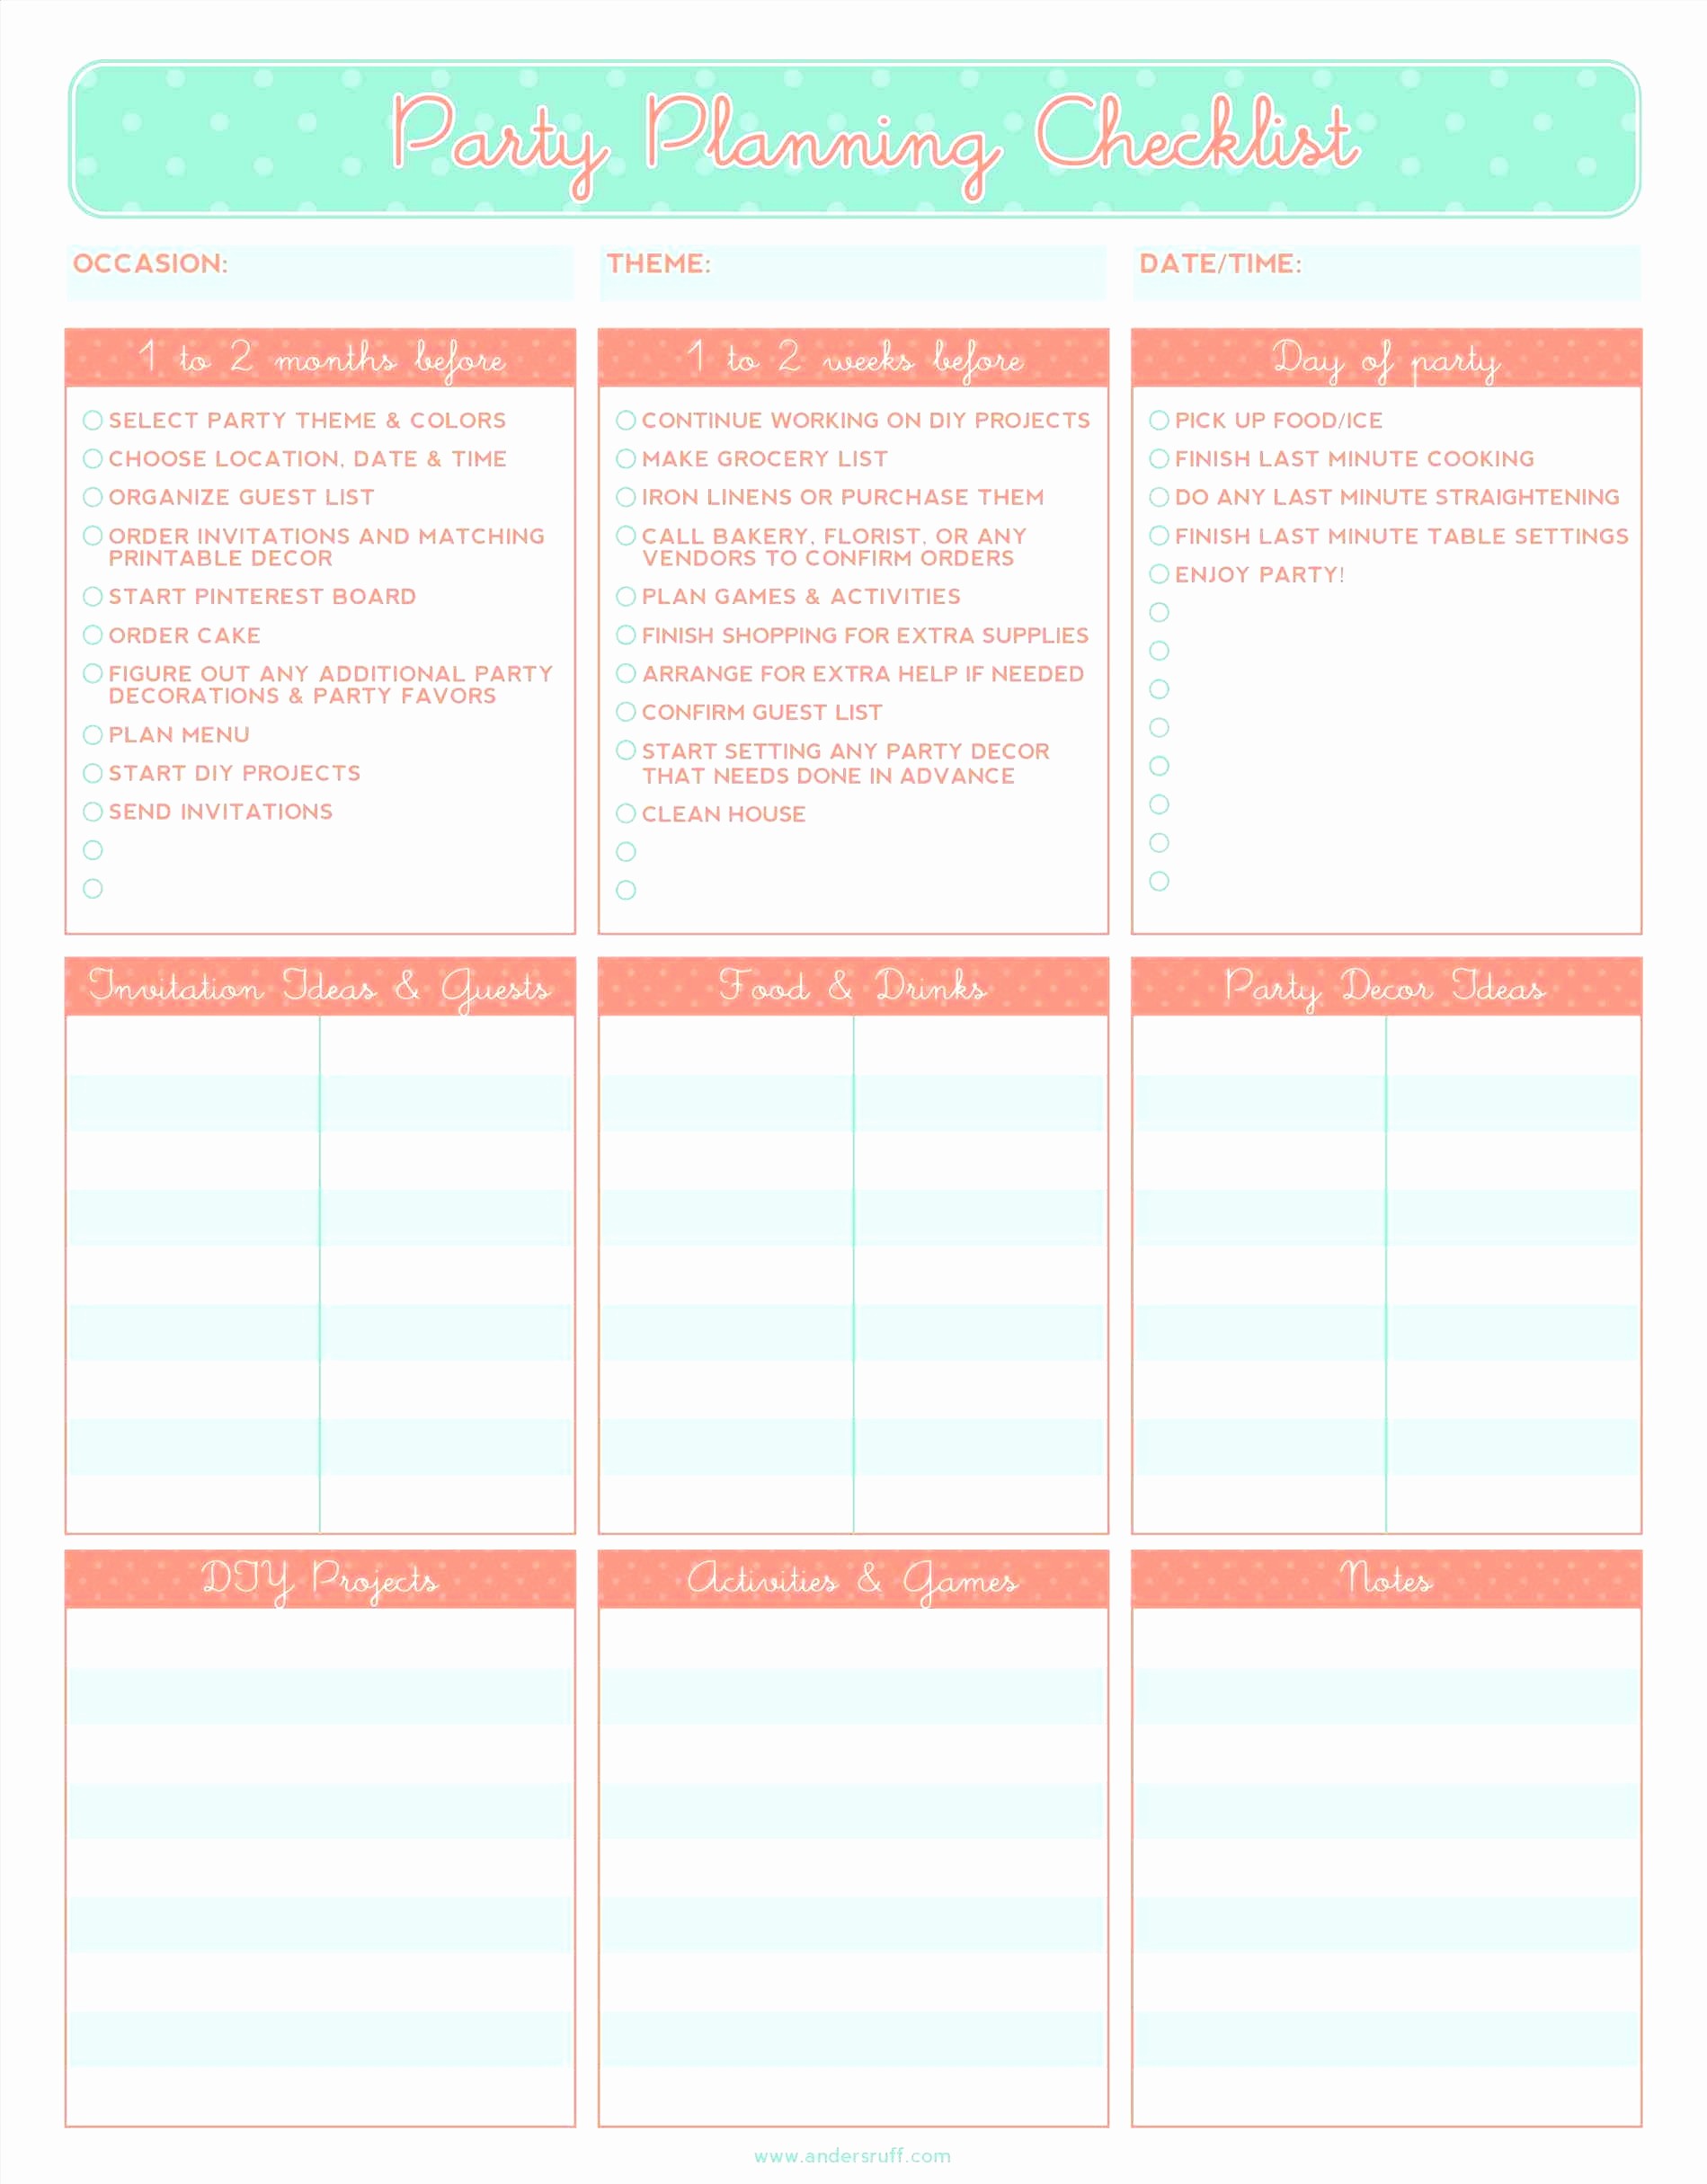 Grocery List Price Comparison Spreadsheet Lovely Shopping Document